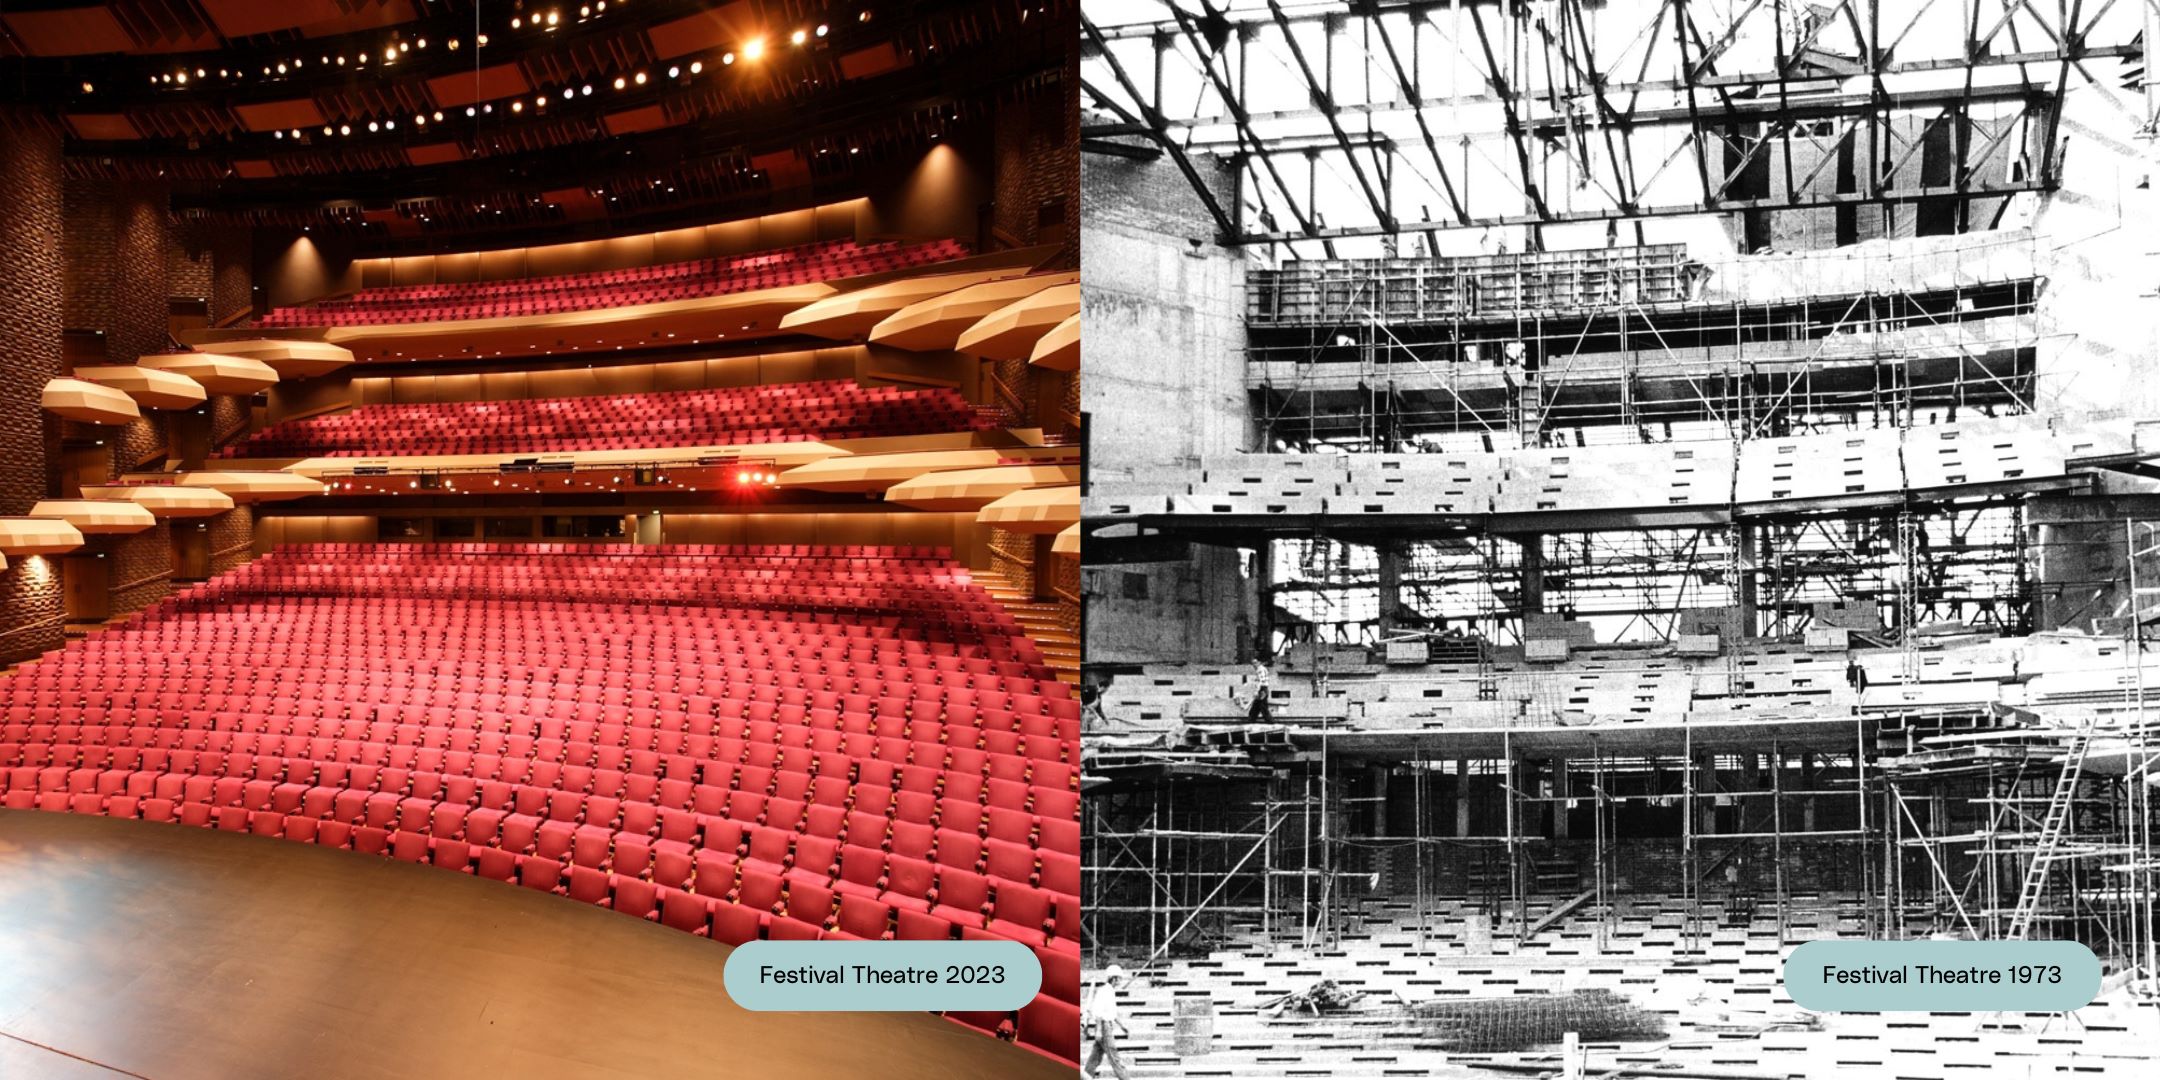 Left is image of the concert hall in 2023, and the same area under construction in 1972.